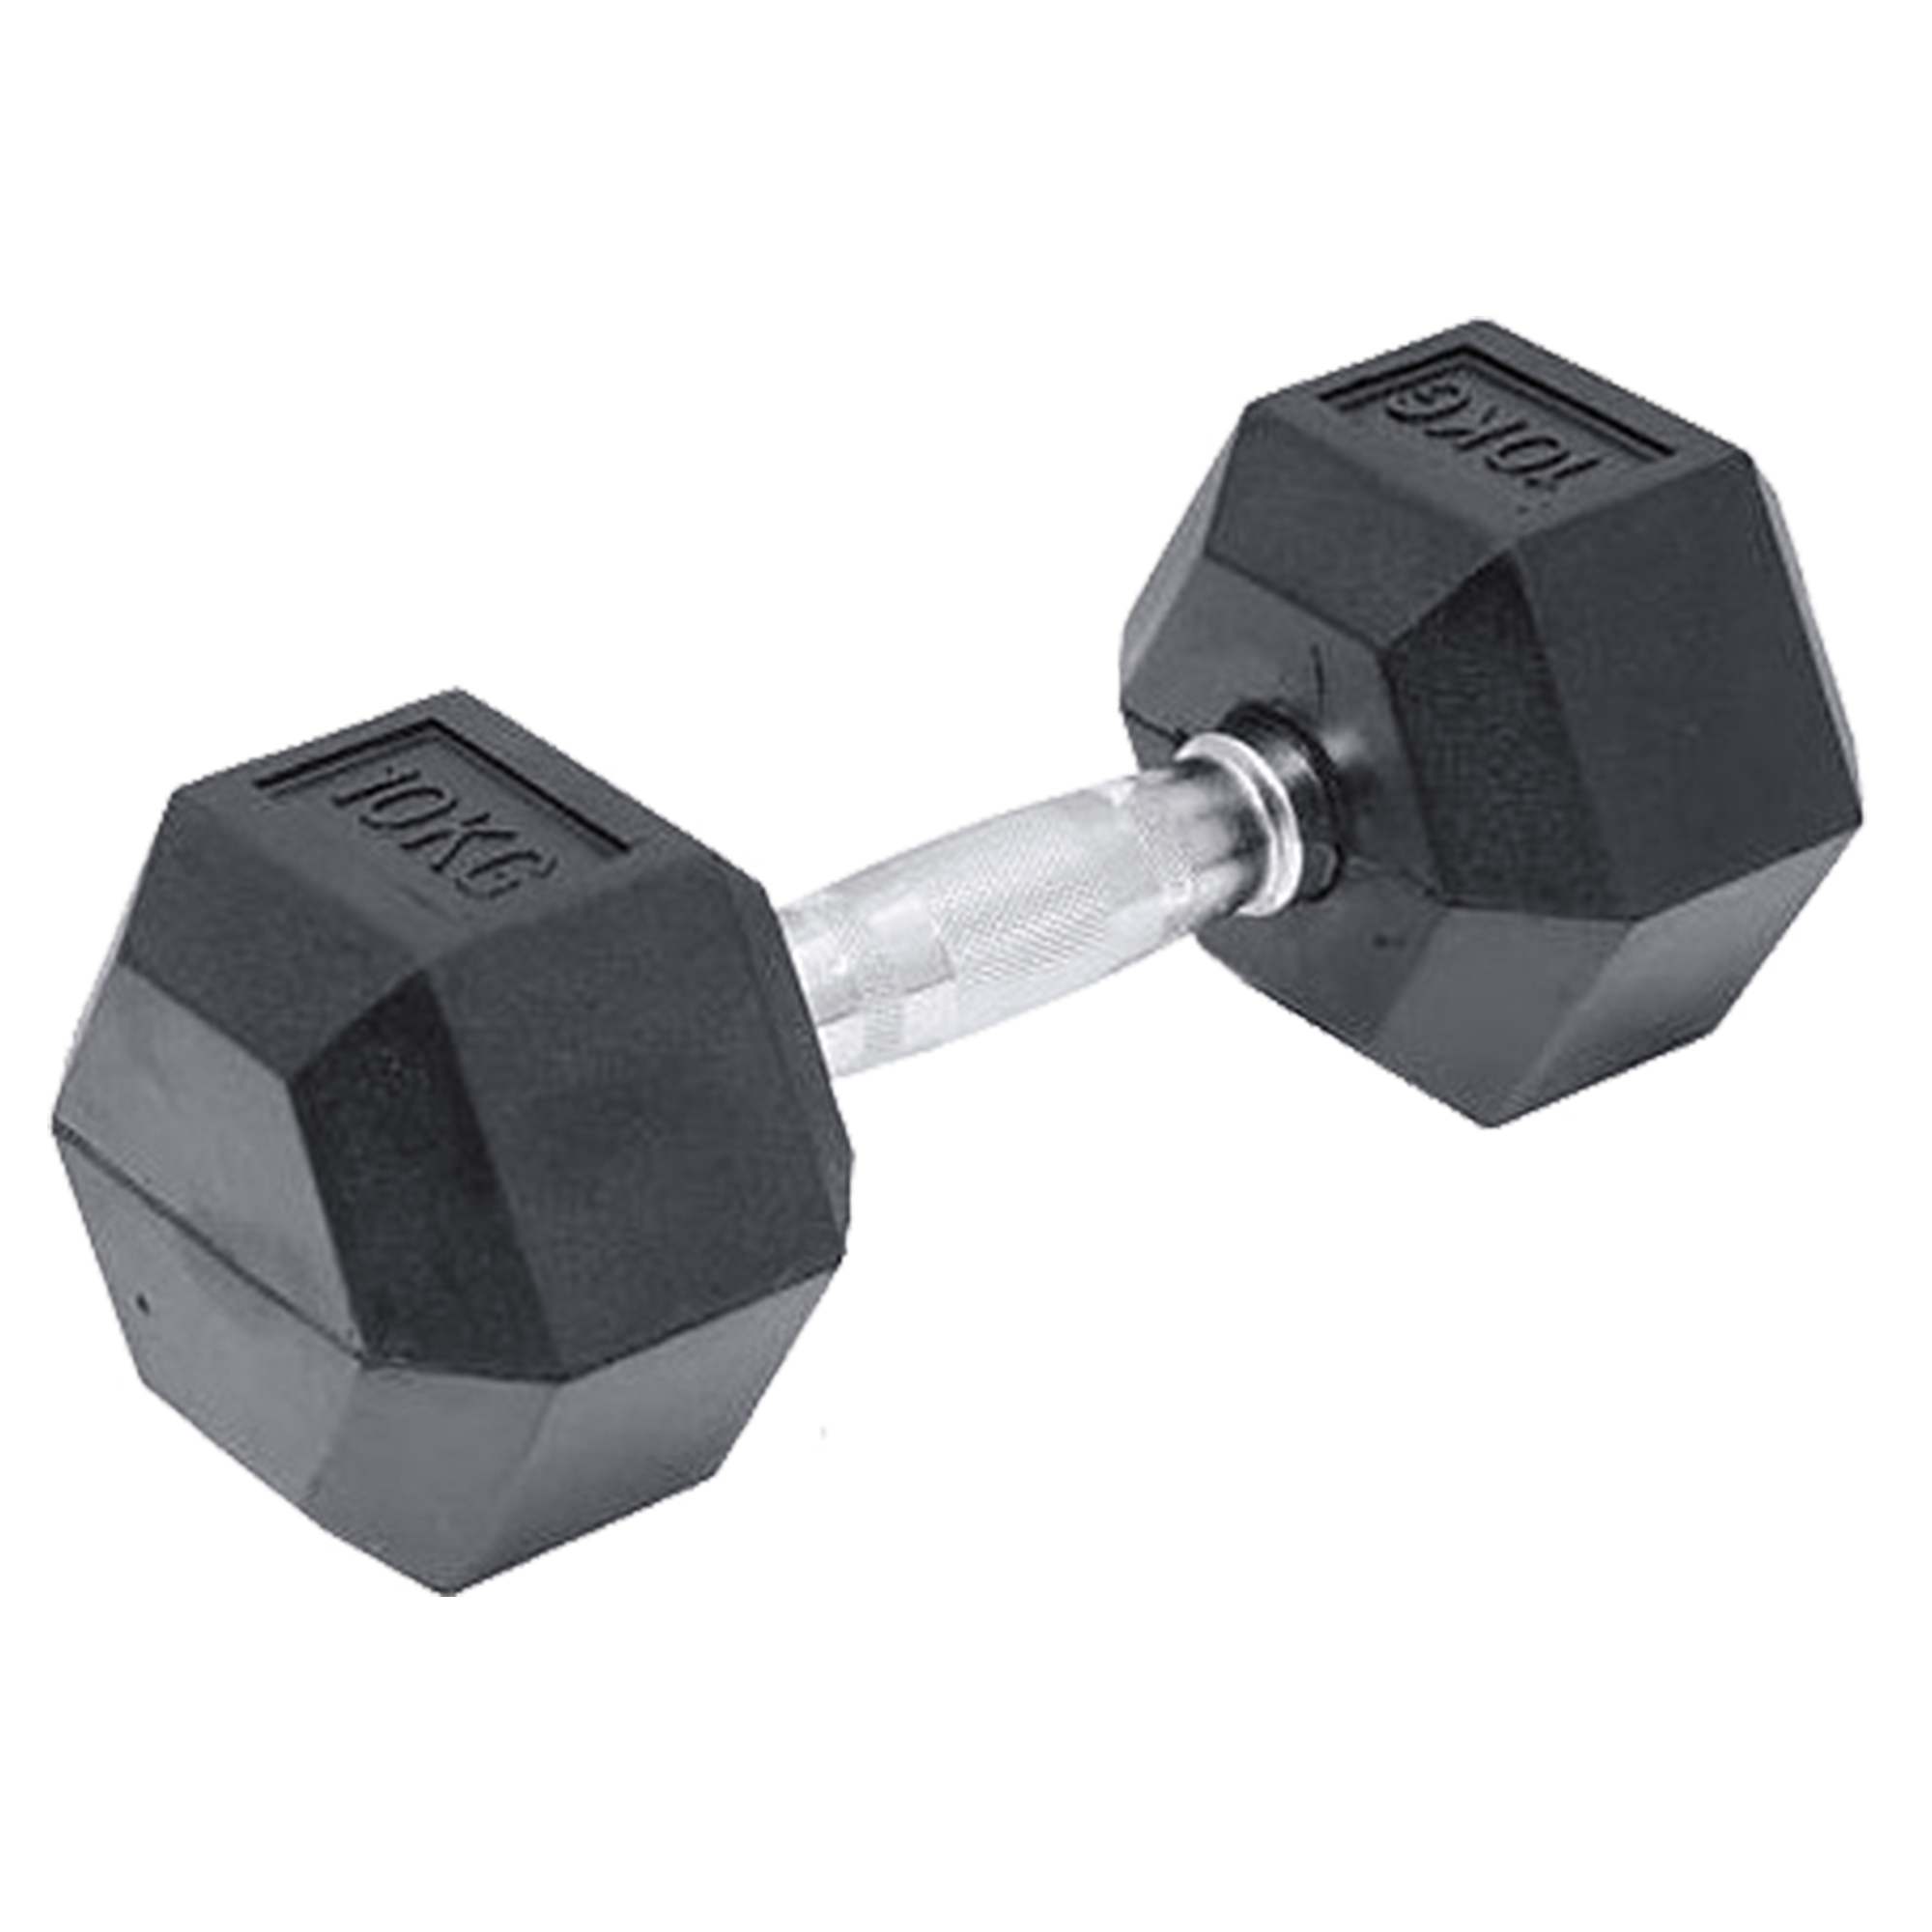 10KG Commercial Rubber Hex Dumbbell Gym Weight 